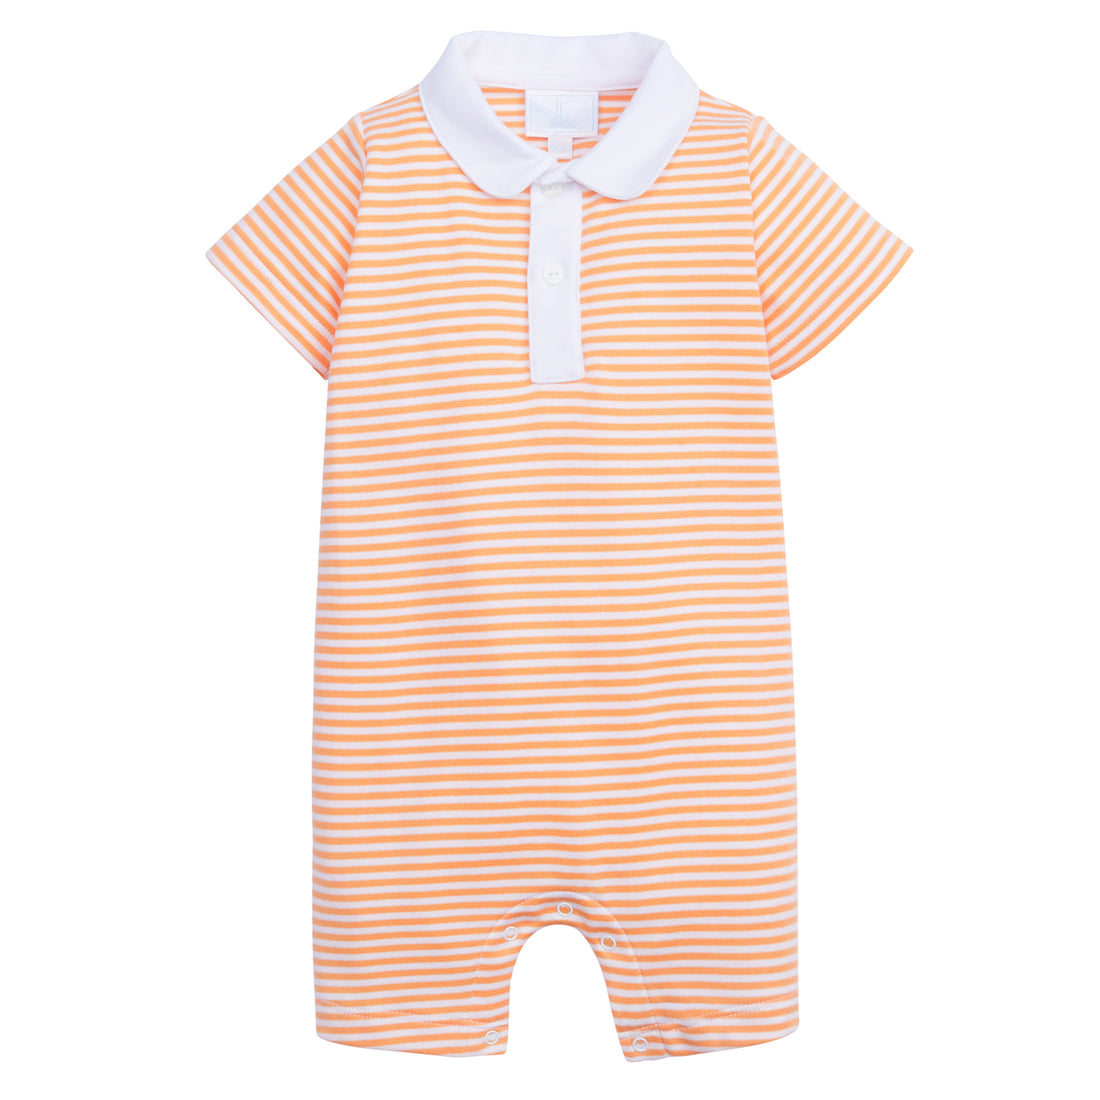 Little English traditional clothing for boys, orange striped knit romper with peter pan collar for spring